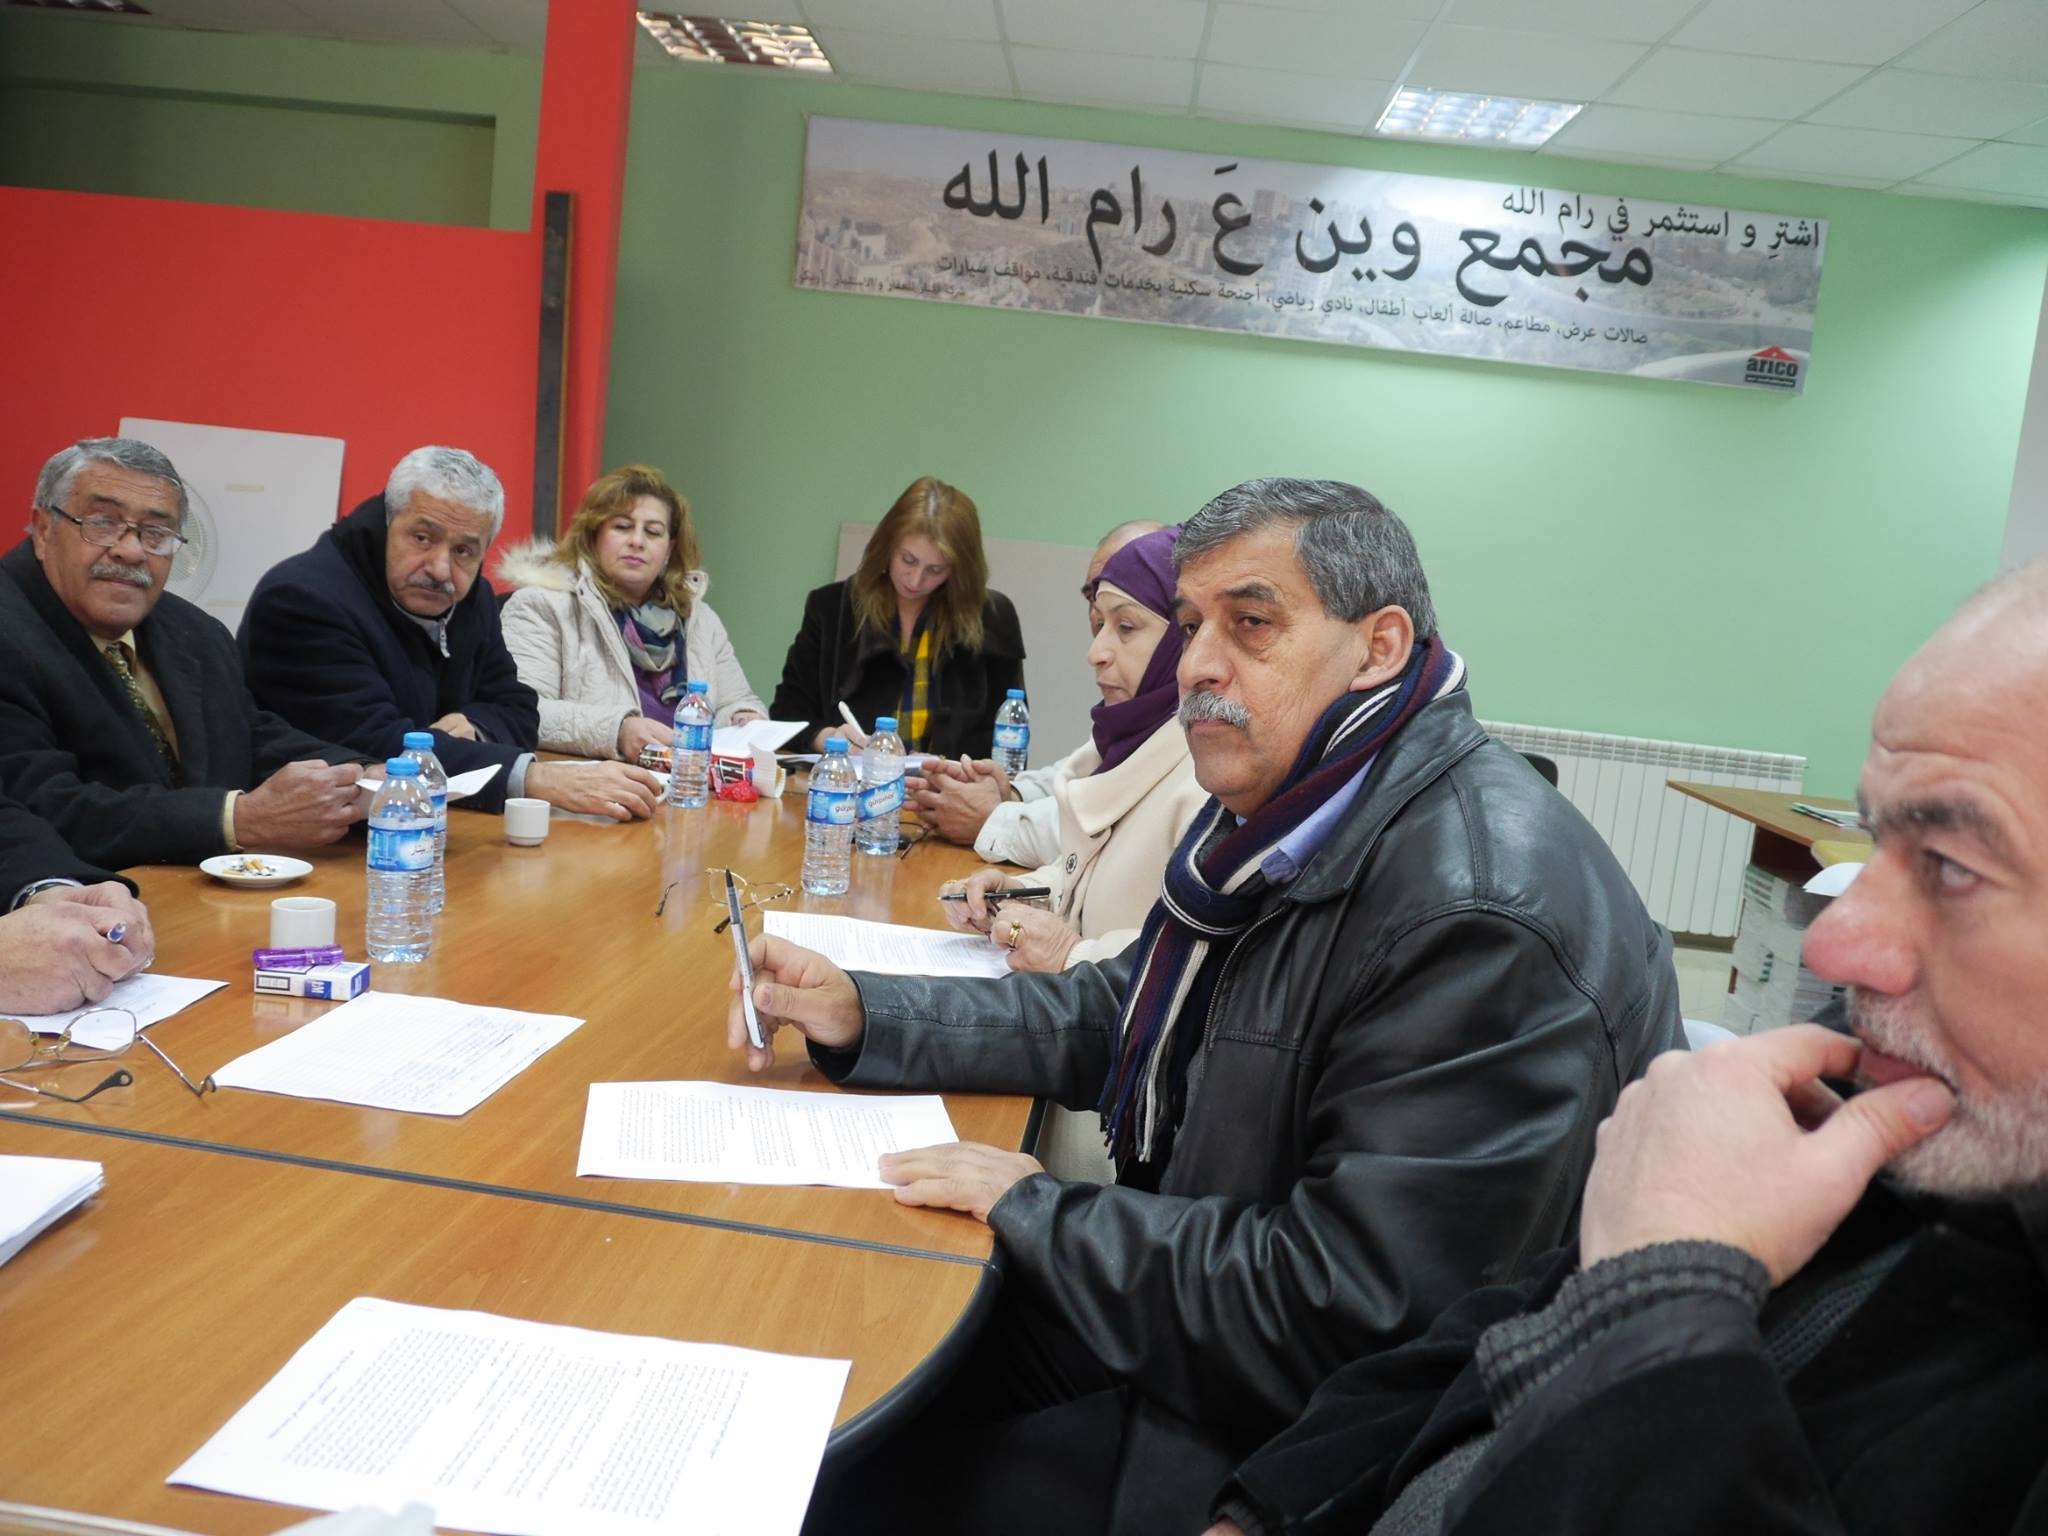  ADWAR Association participation in the central committee of WATANEYON to end the split initiative’s meeting in Ramallah